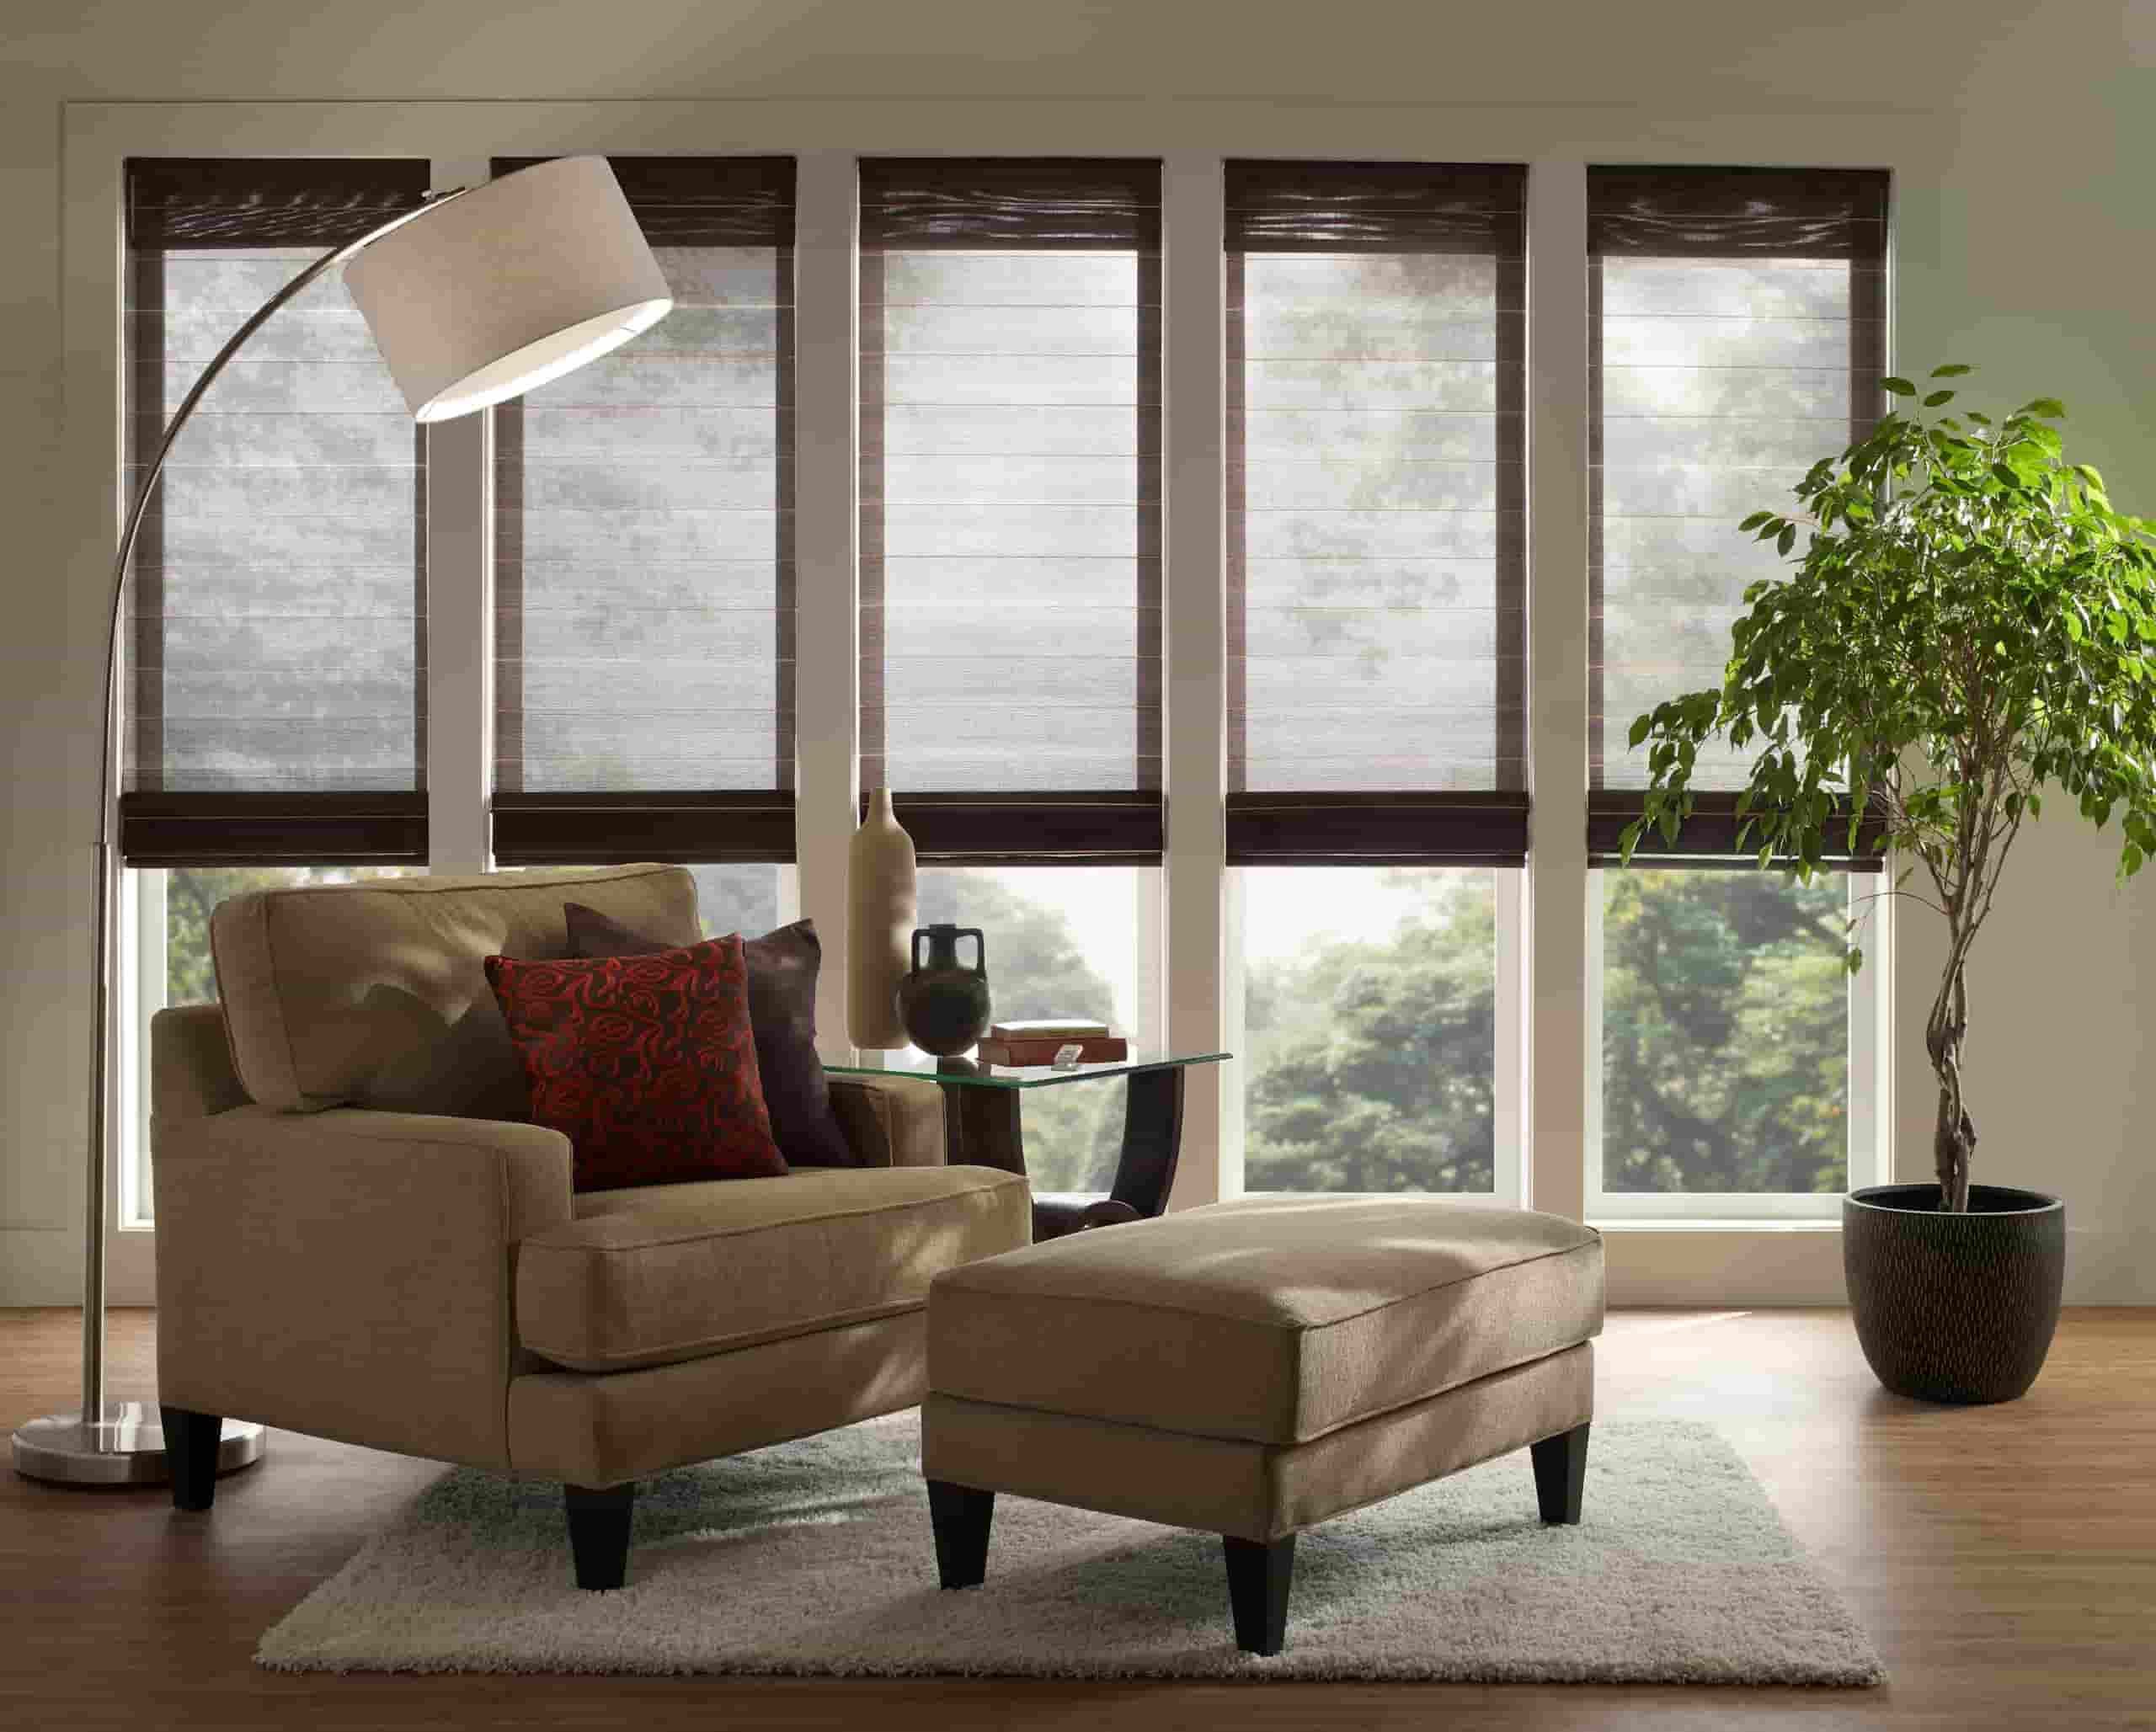 Choosing Lutron Serena Smart Shades for Your Home featured image